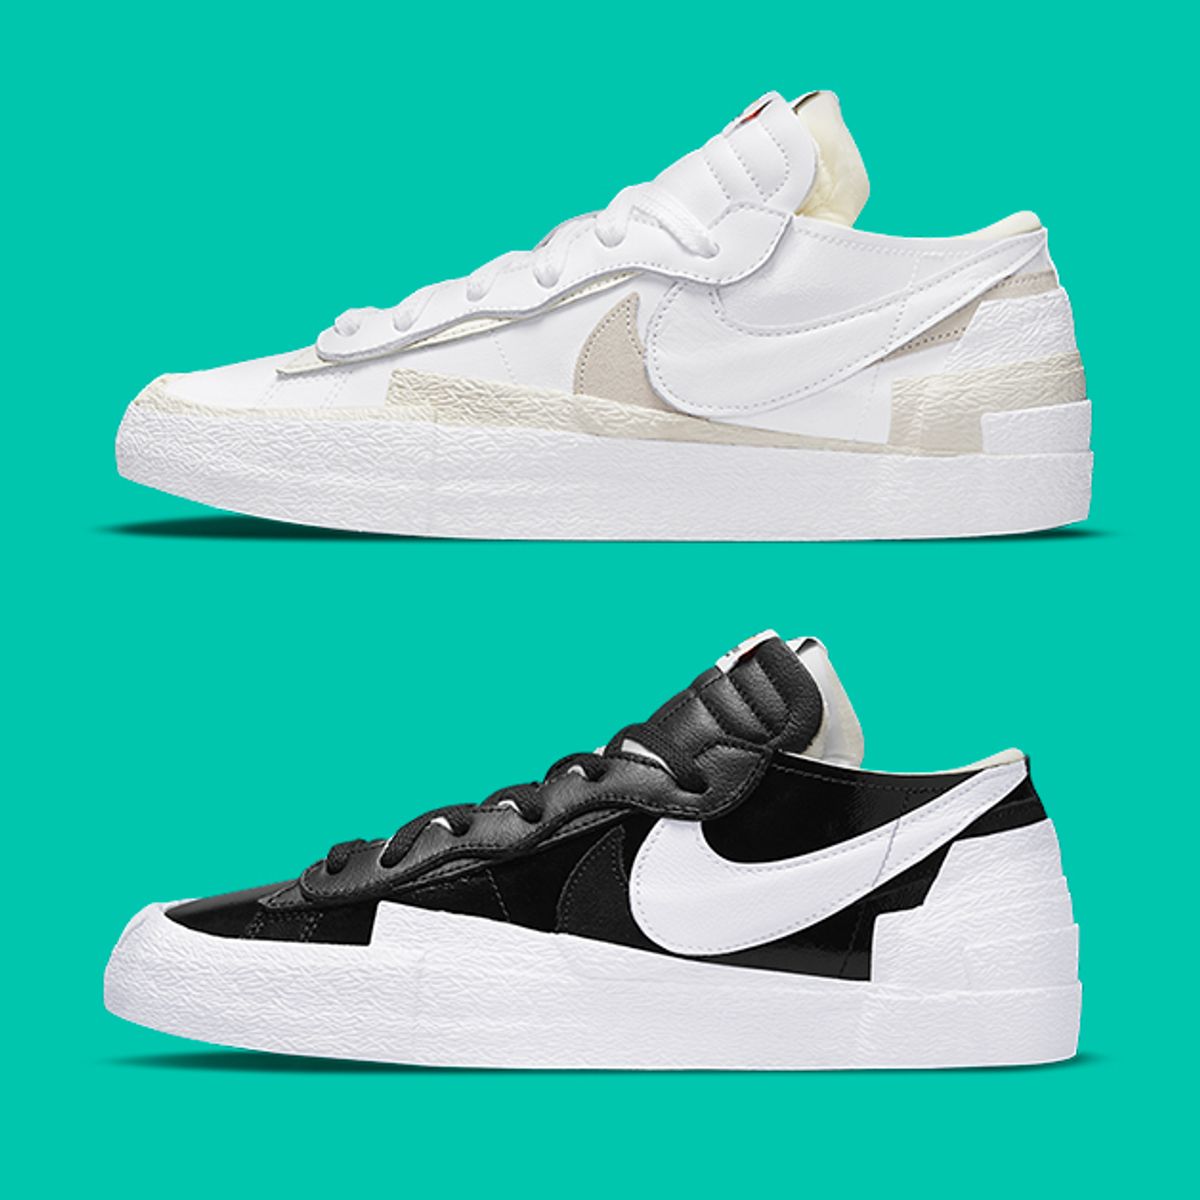 Permanecer Siempre Microprocesador Where to Buy the sacai x Nike Blazer Low 'Black' and 'White' Patent Leather  - Sneaker Freaker